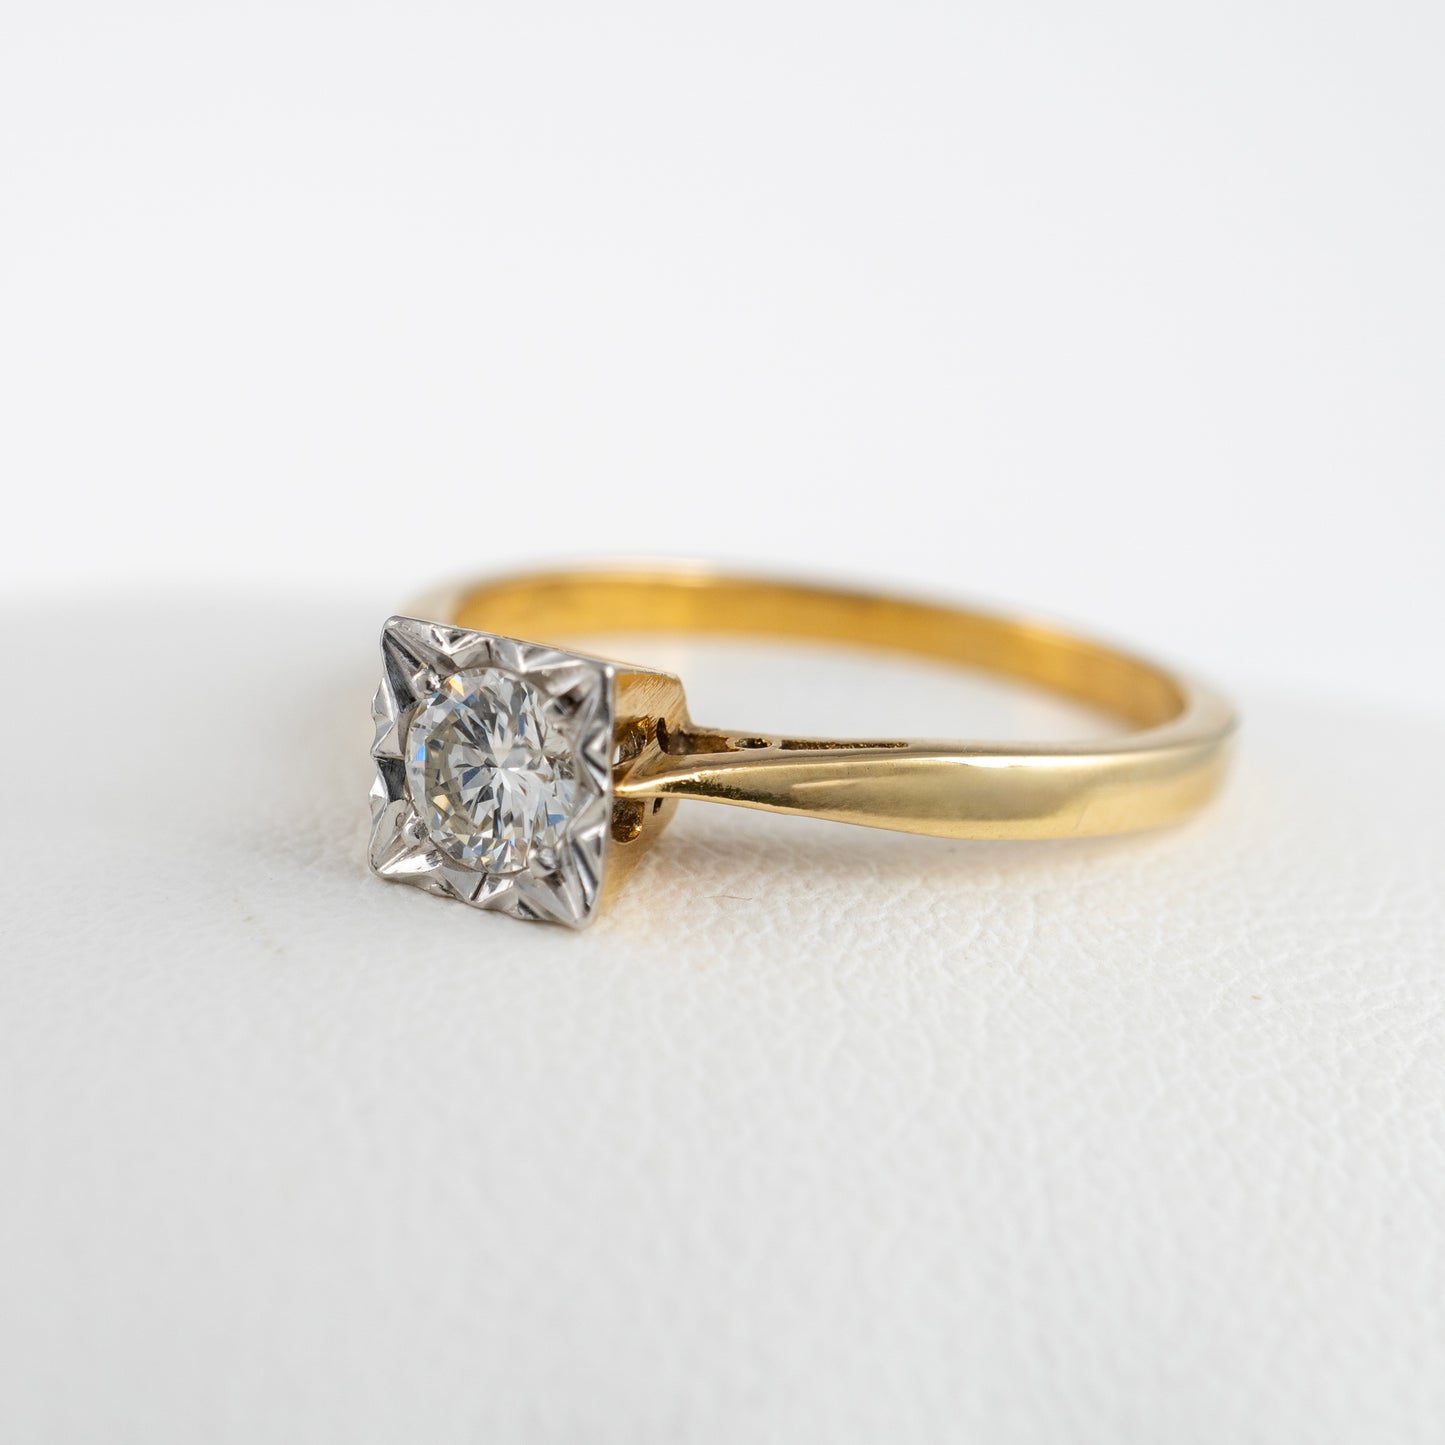 Vintage 18ct Gold Diamond Solitaire Ring